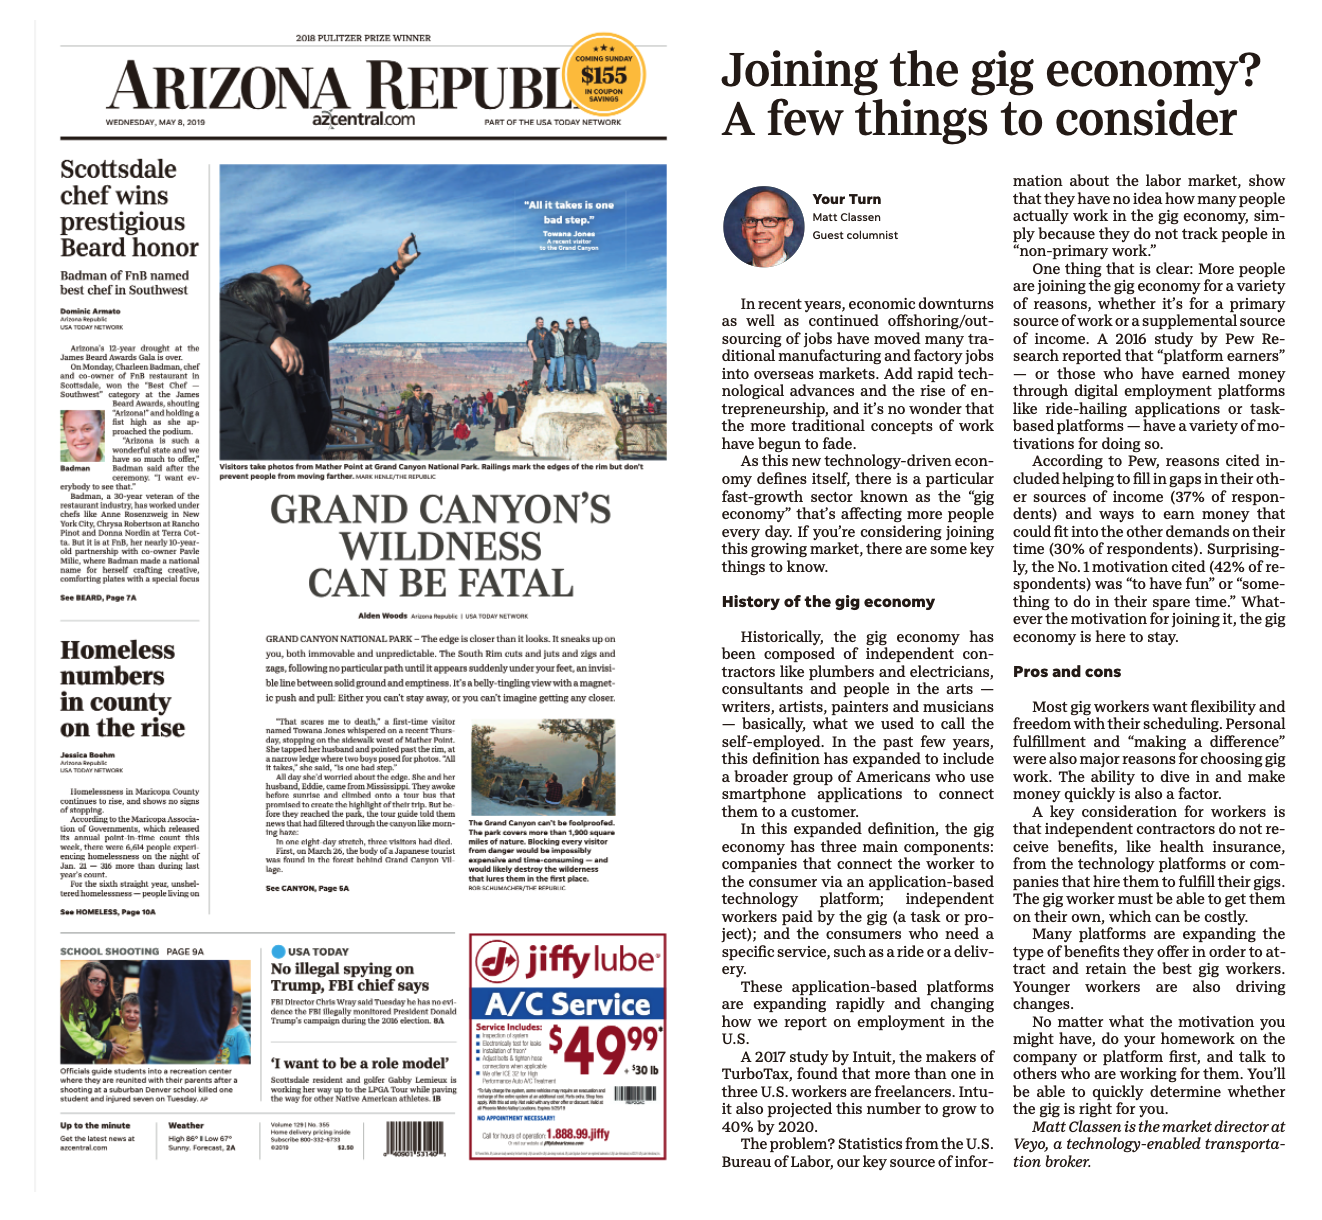 Veyo highlighted in the Arizona Republic